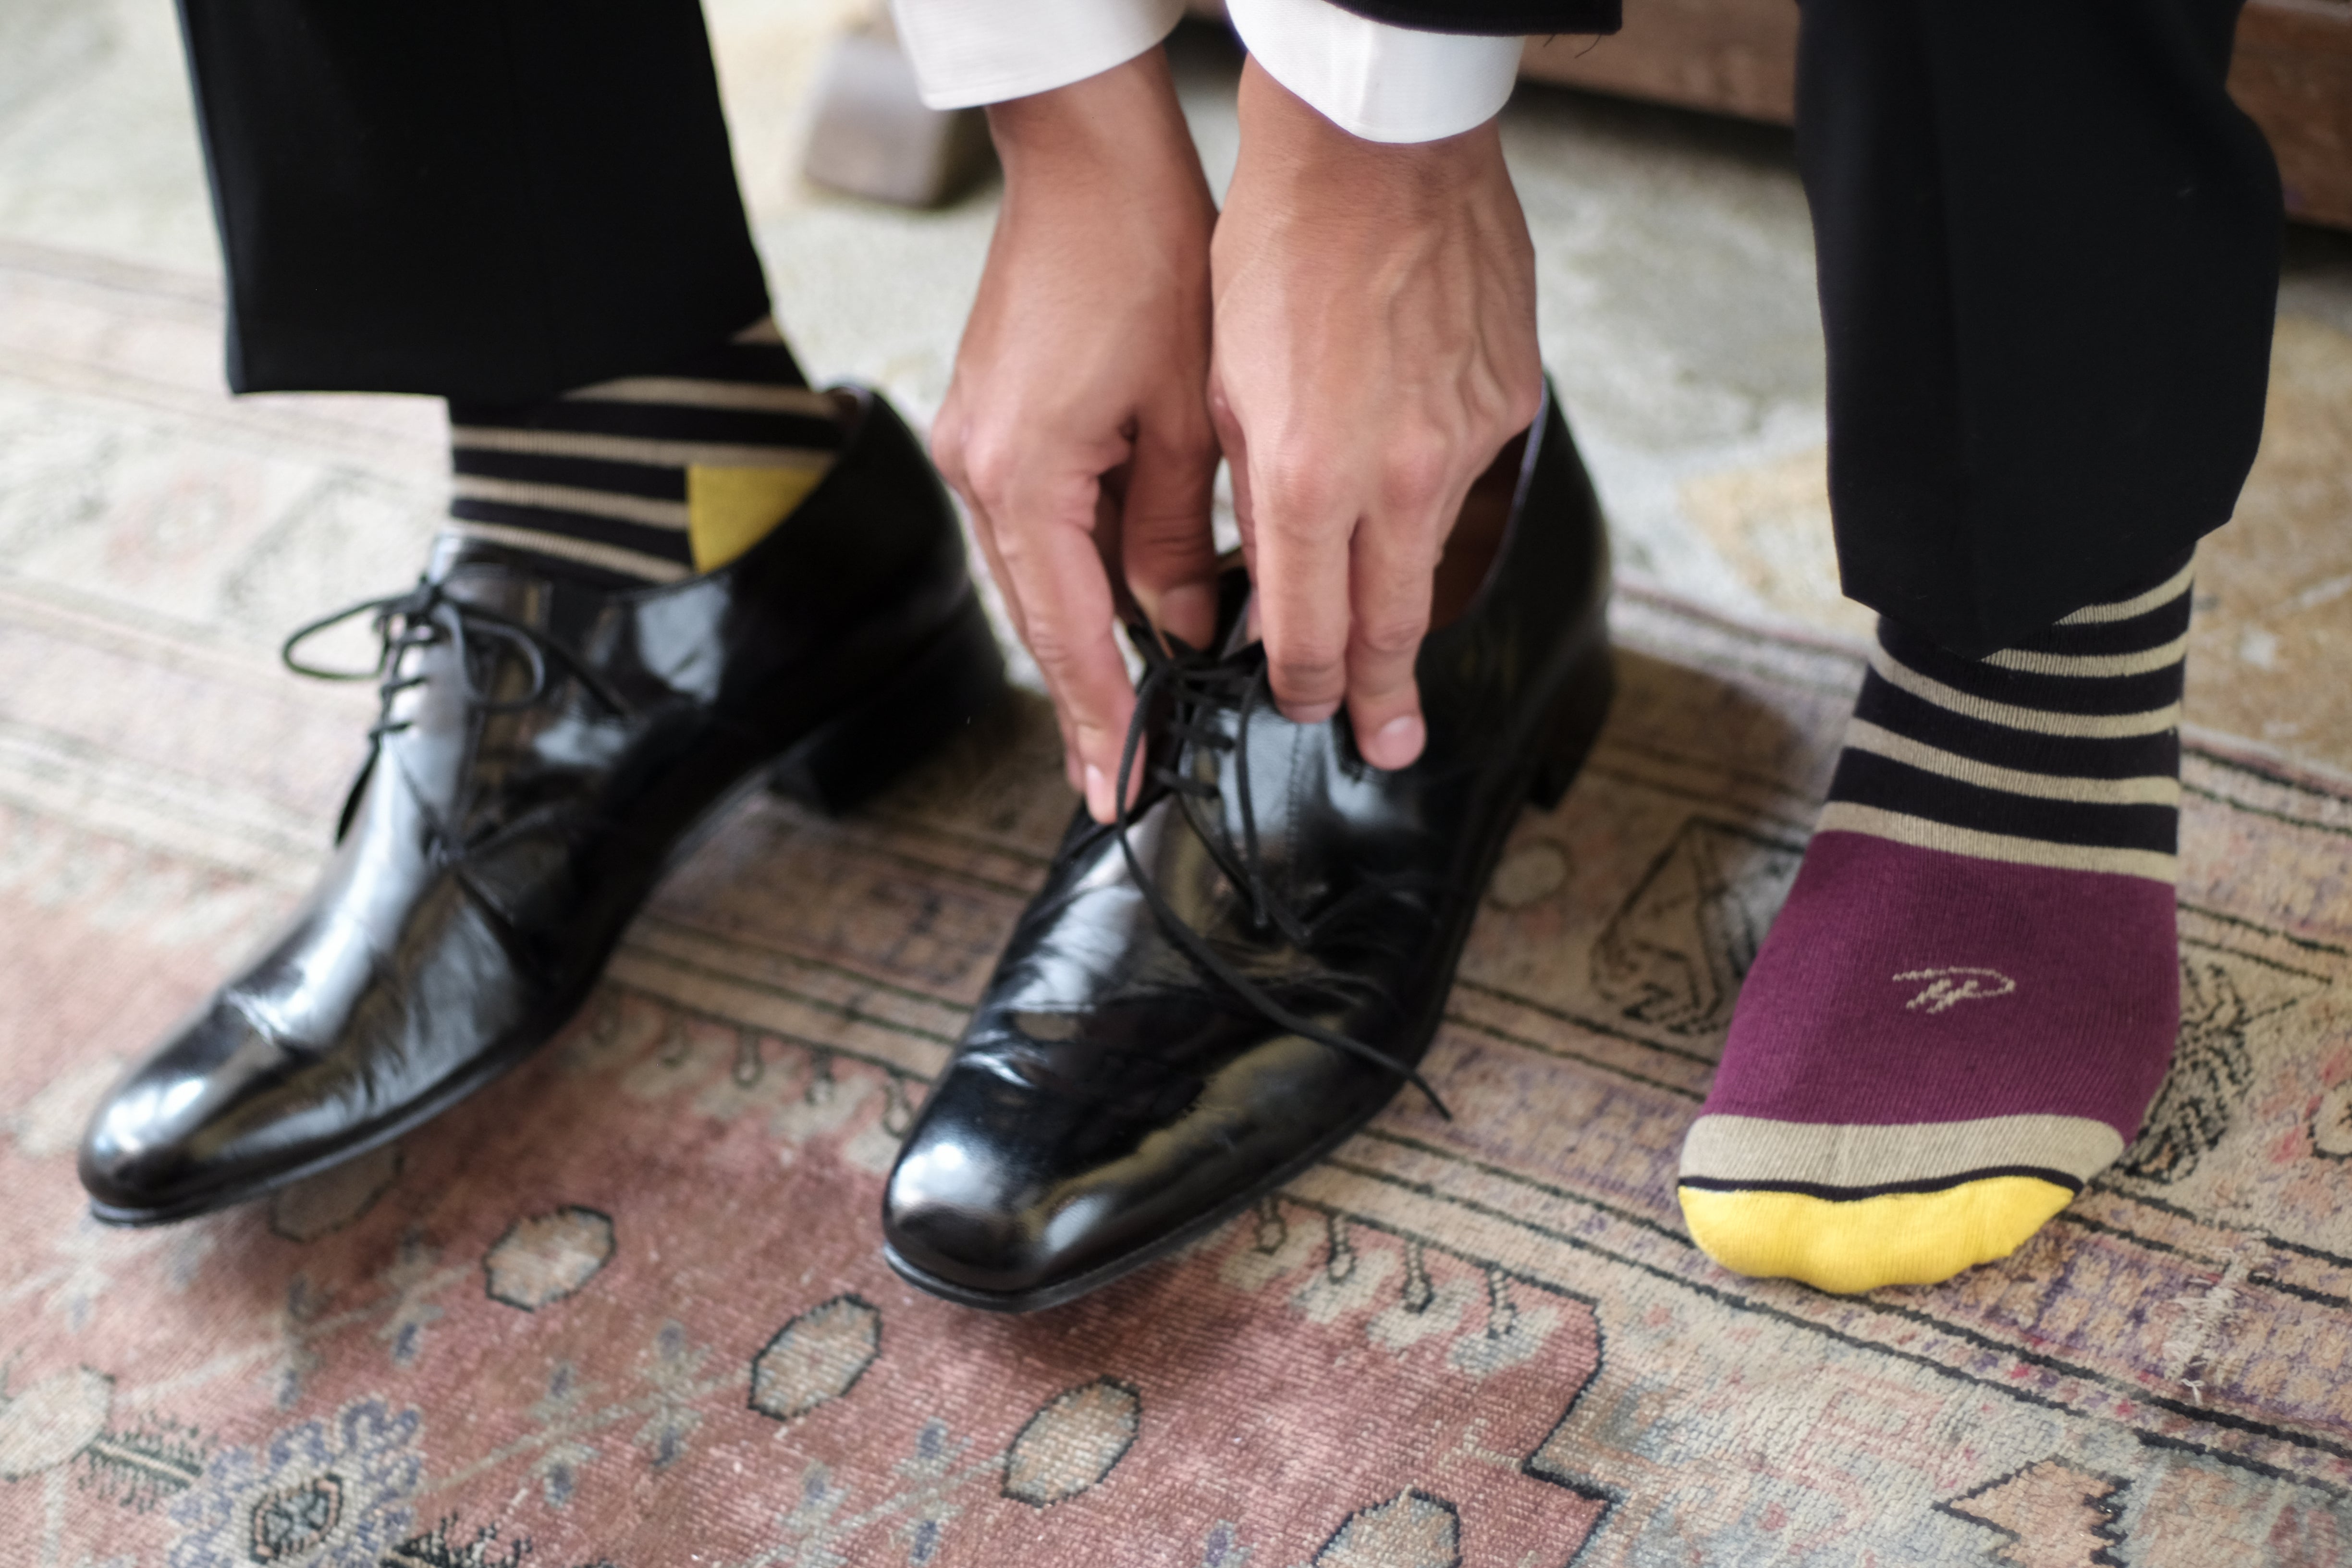 black and beige striped over the calf dress socks with plum middle of foot and yellow toe, black dress shoes, black dress pants